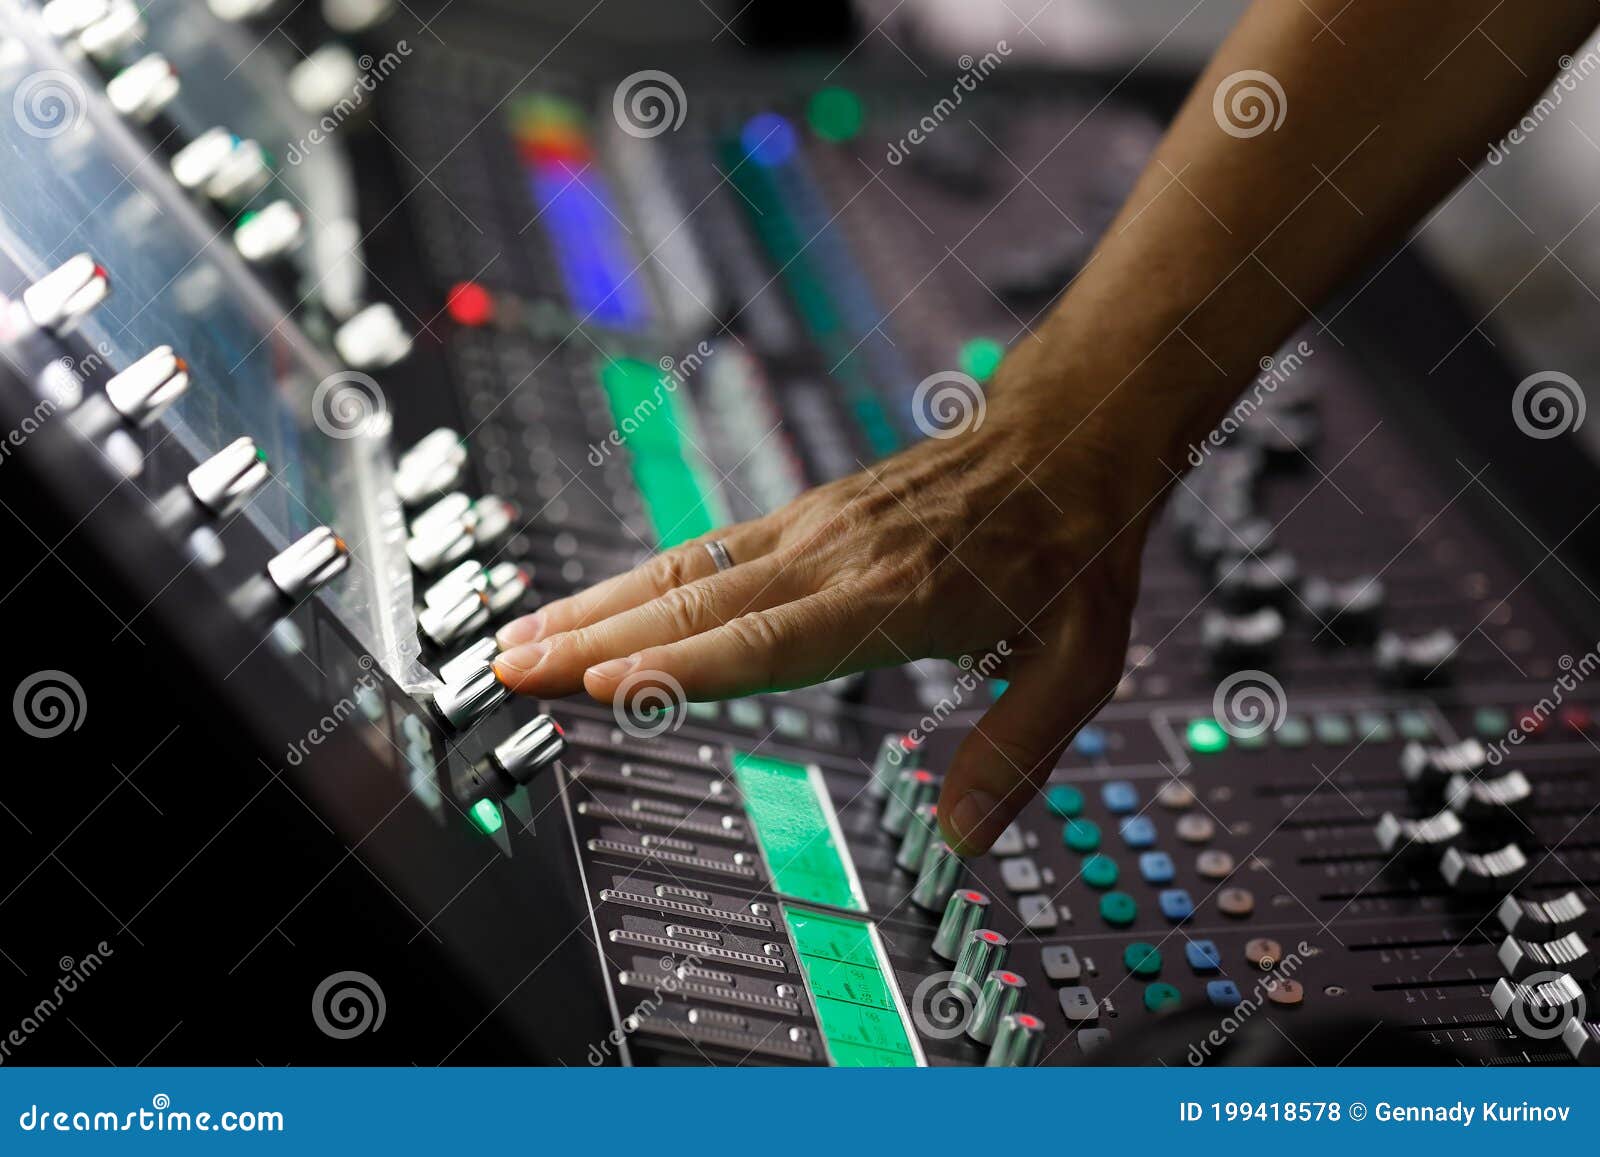 Operator Working with Audio Mixer Control Panel Stock Photo - Image of ...